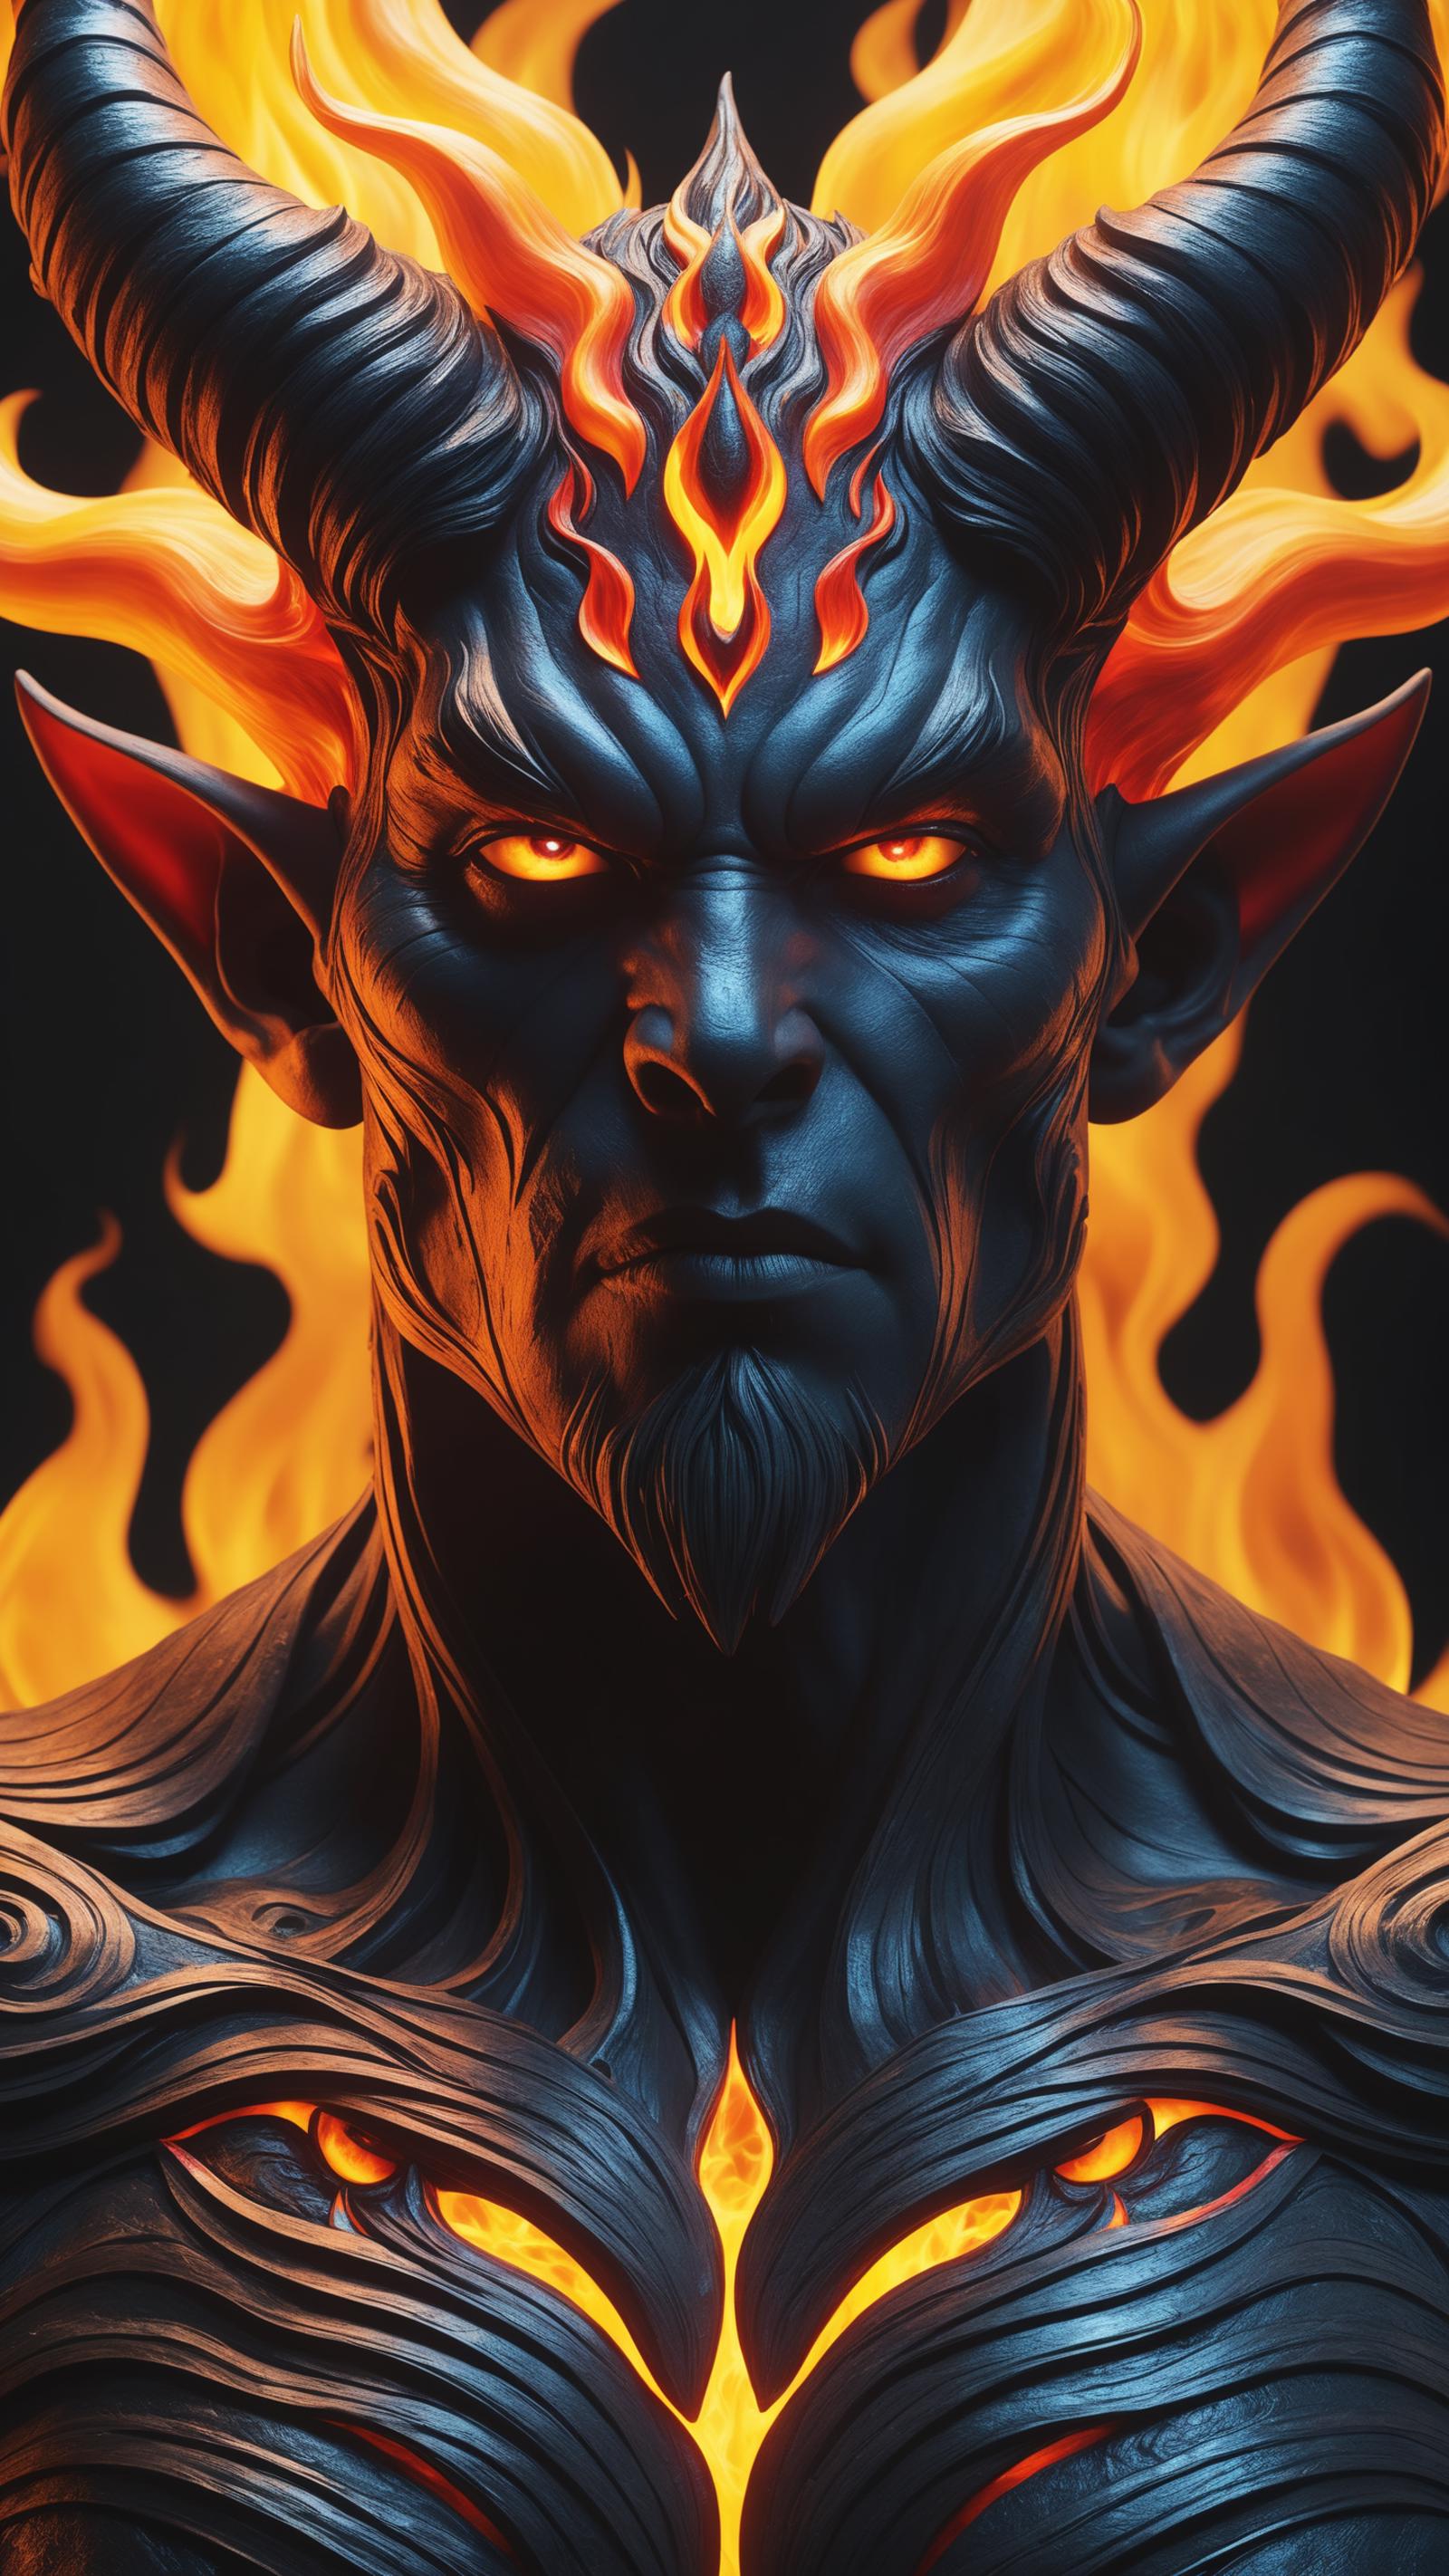 Blue Demon with Red Flames: A 3D Rendered Artwork of a Dark and Fiery Character